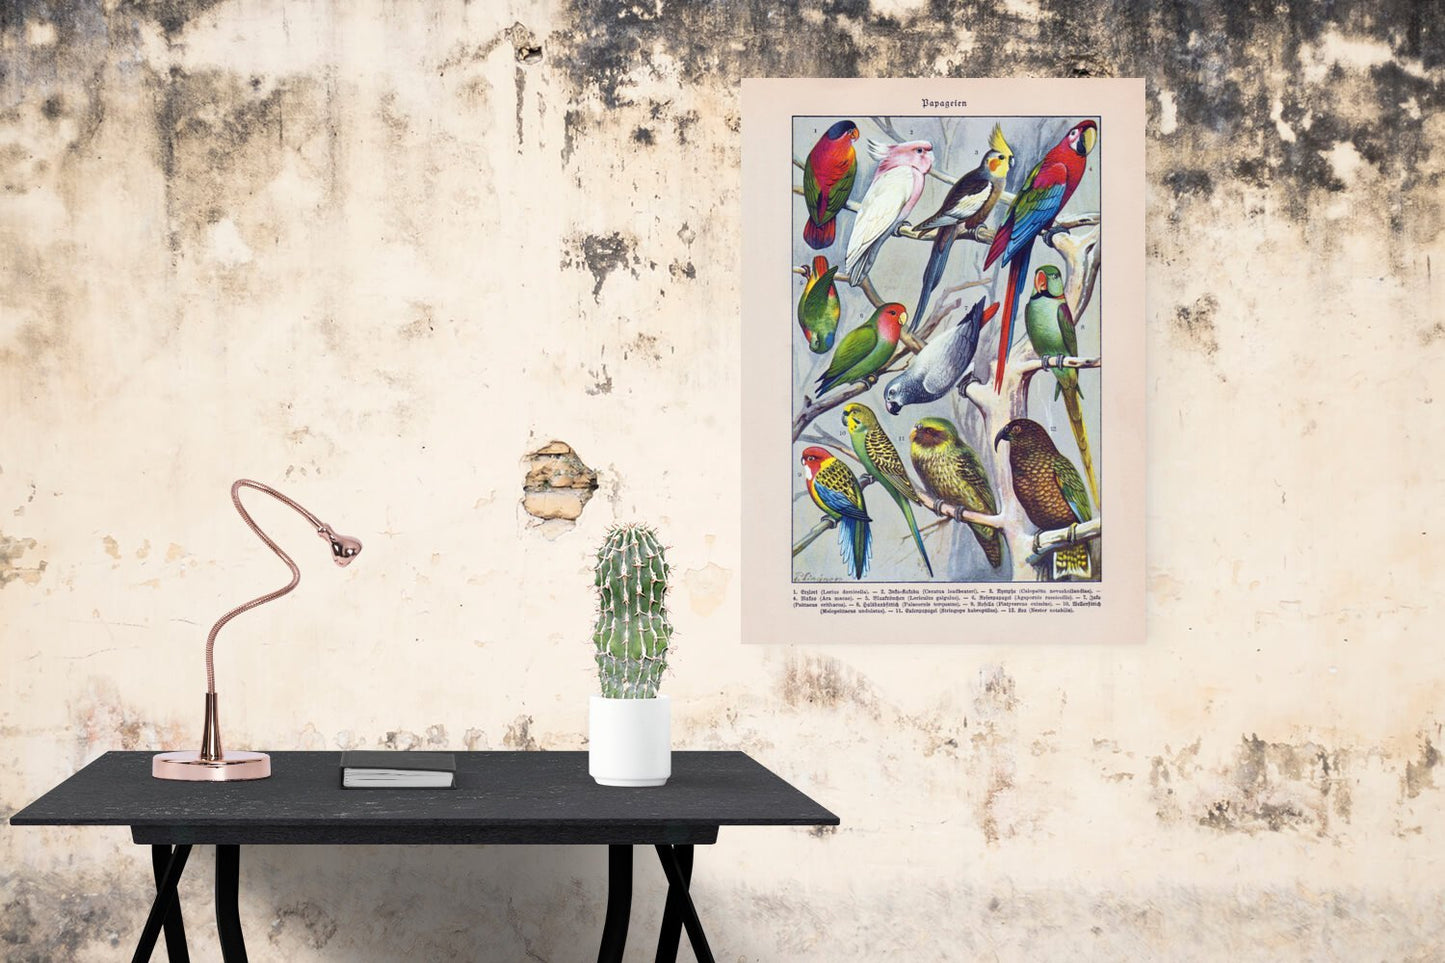 Papagaien Macaw and Parrot Vintage Poster